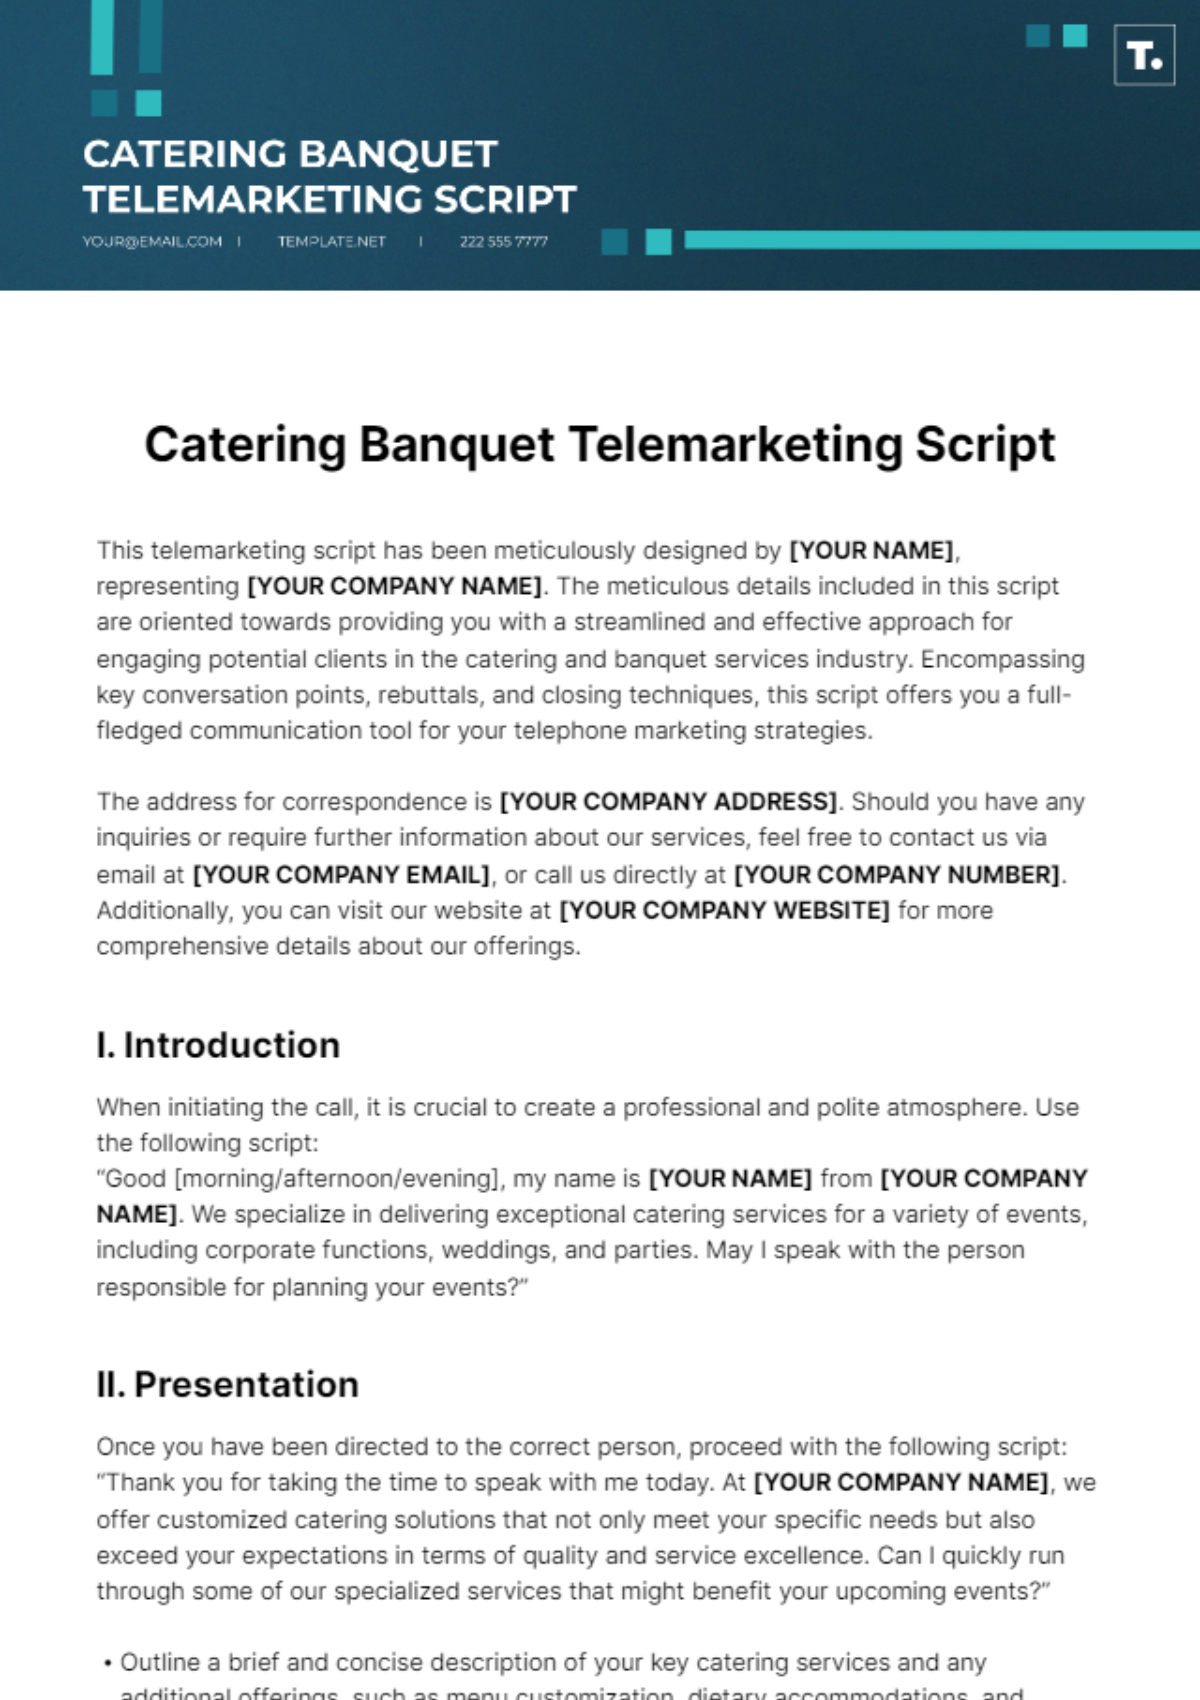 Free Catering Banquet Telemarketing Script Template